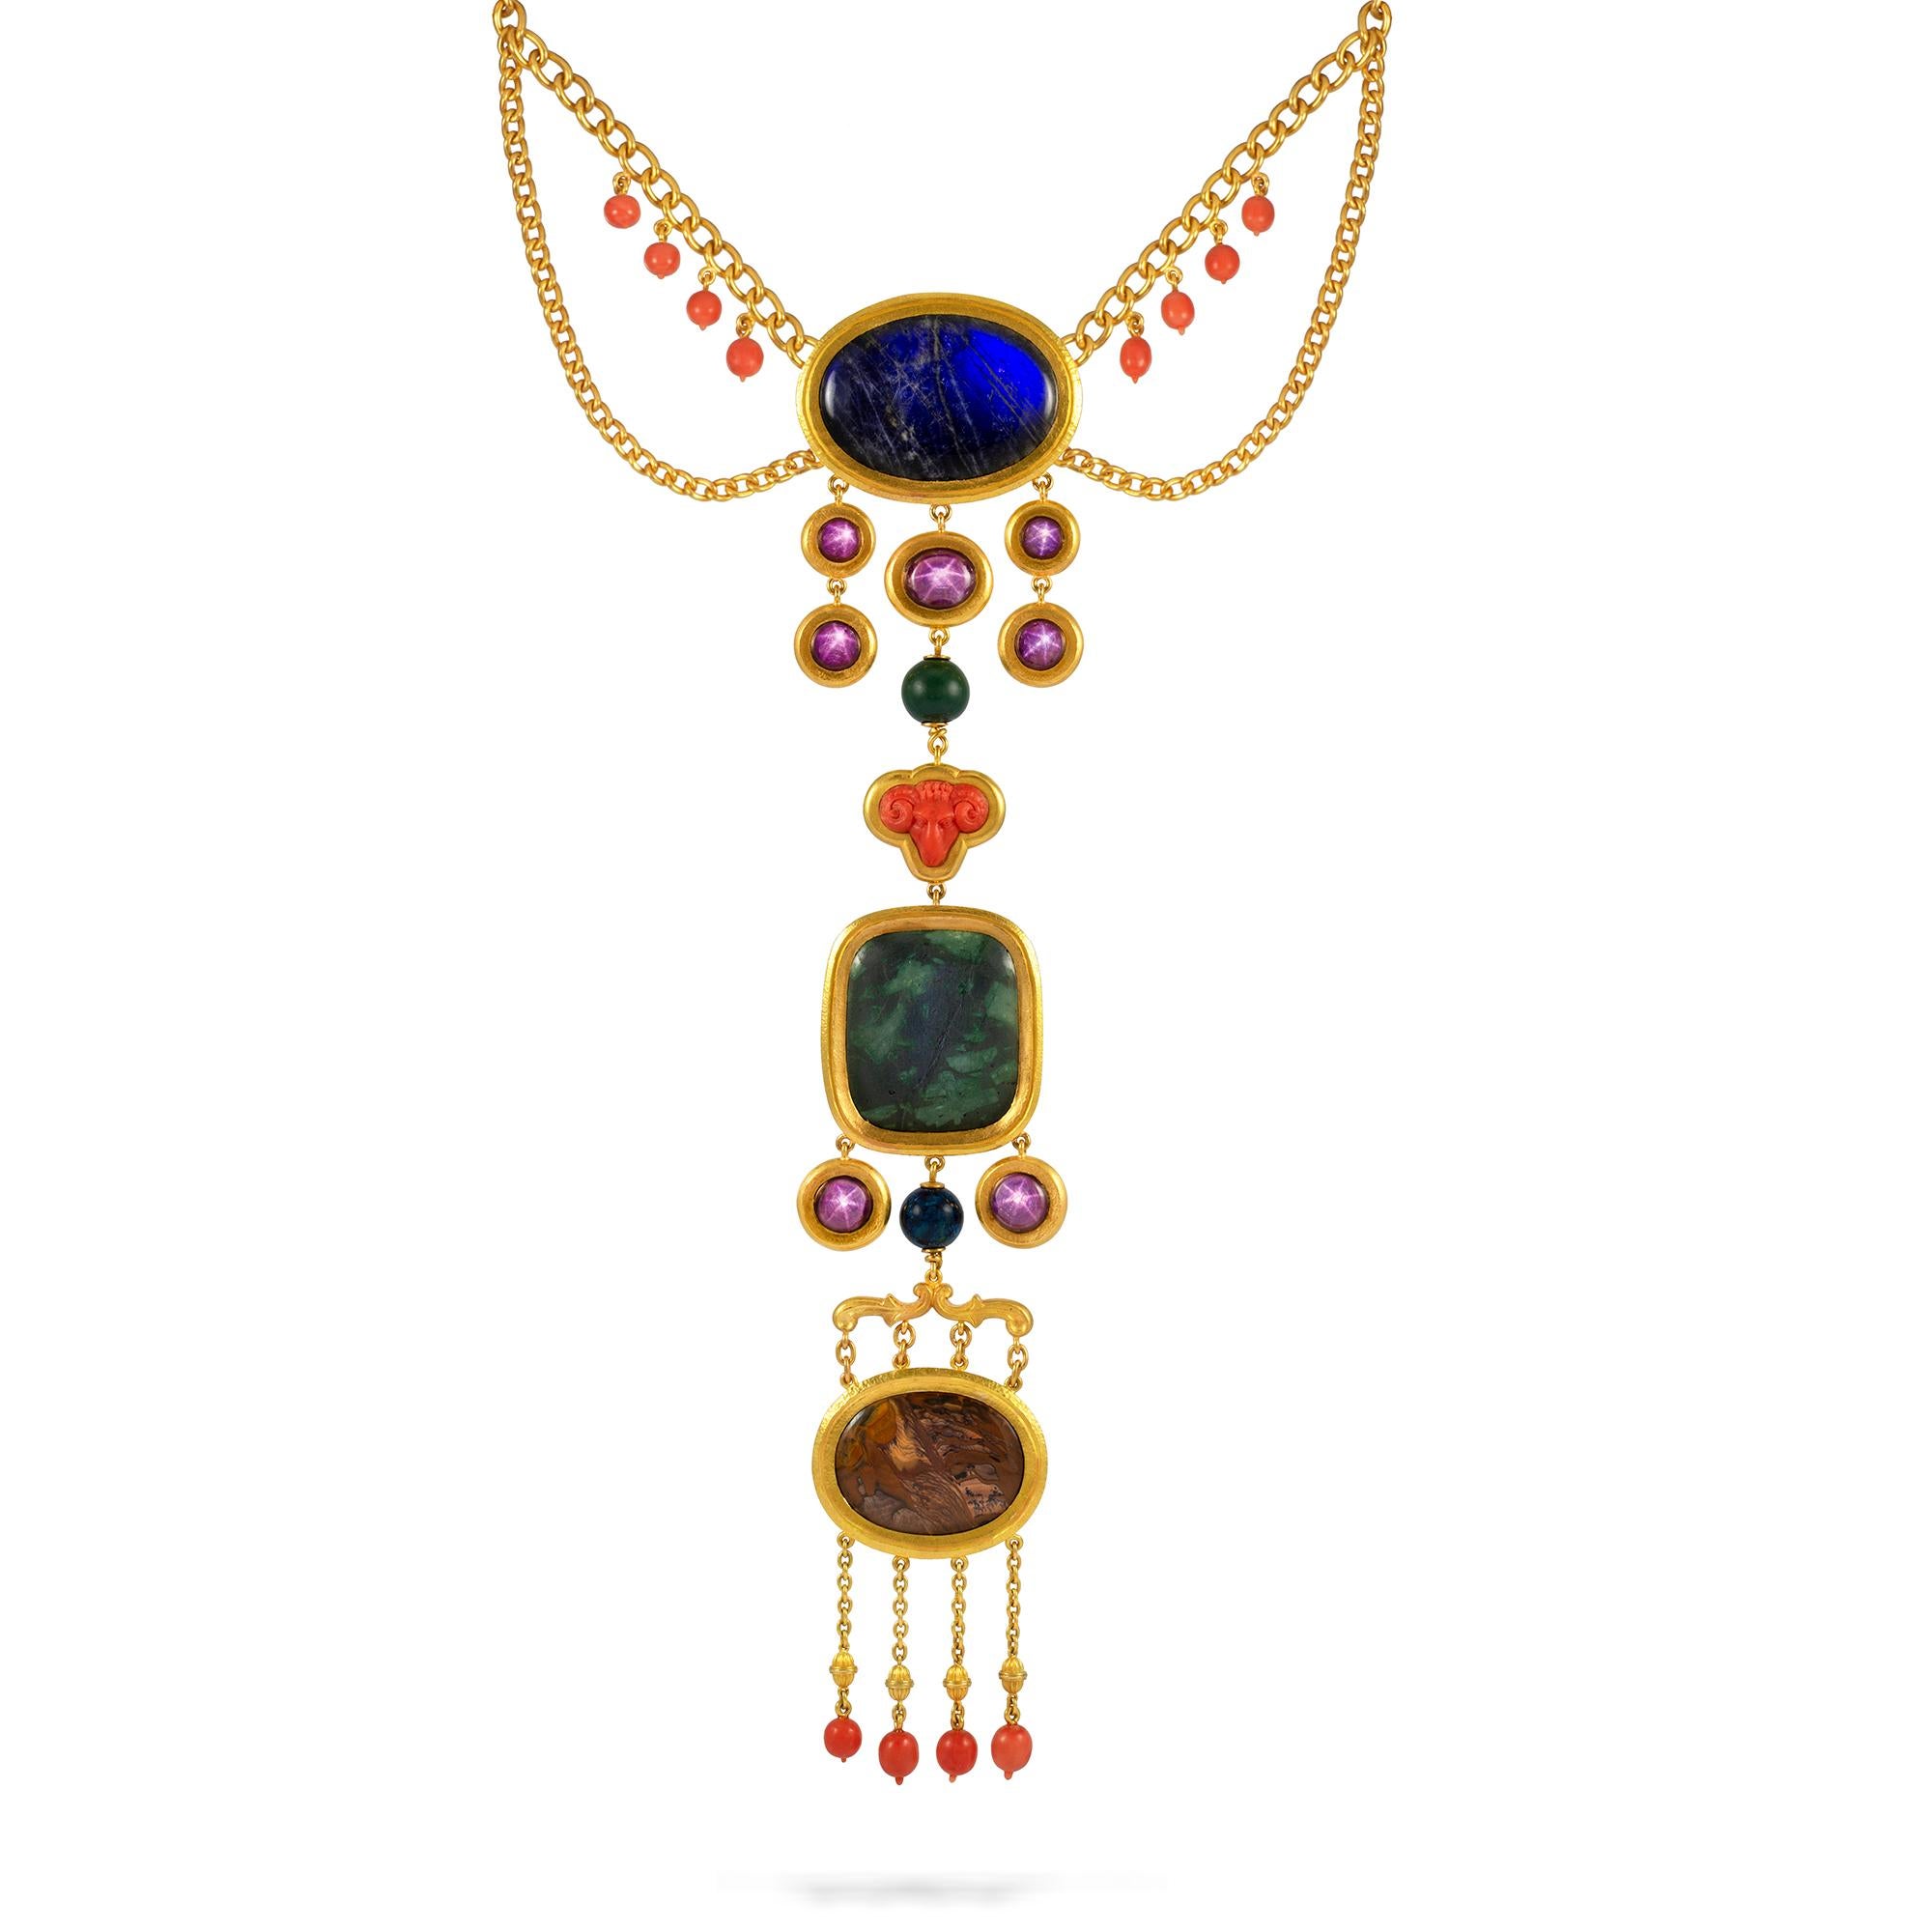 archaeological revival jewelry